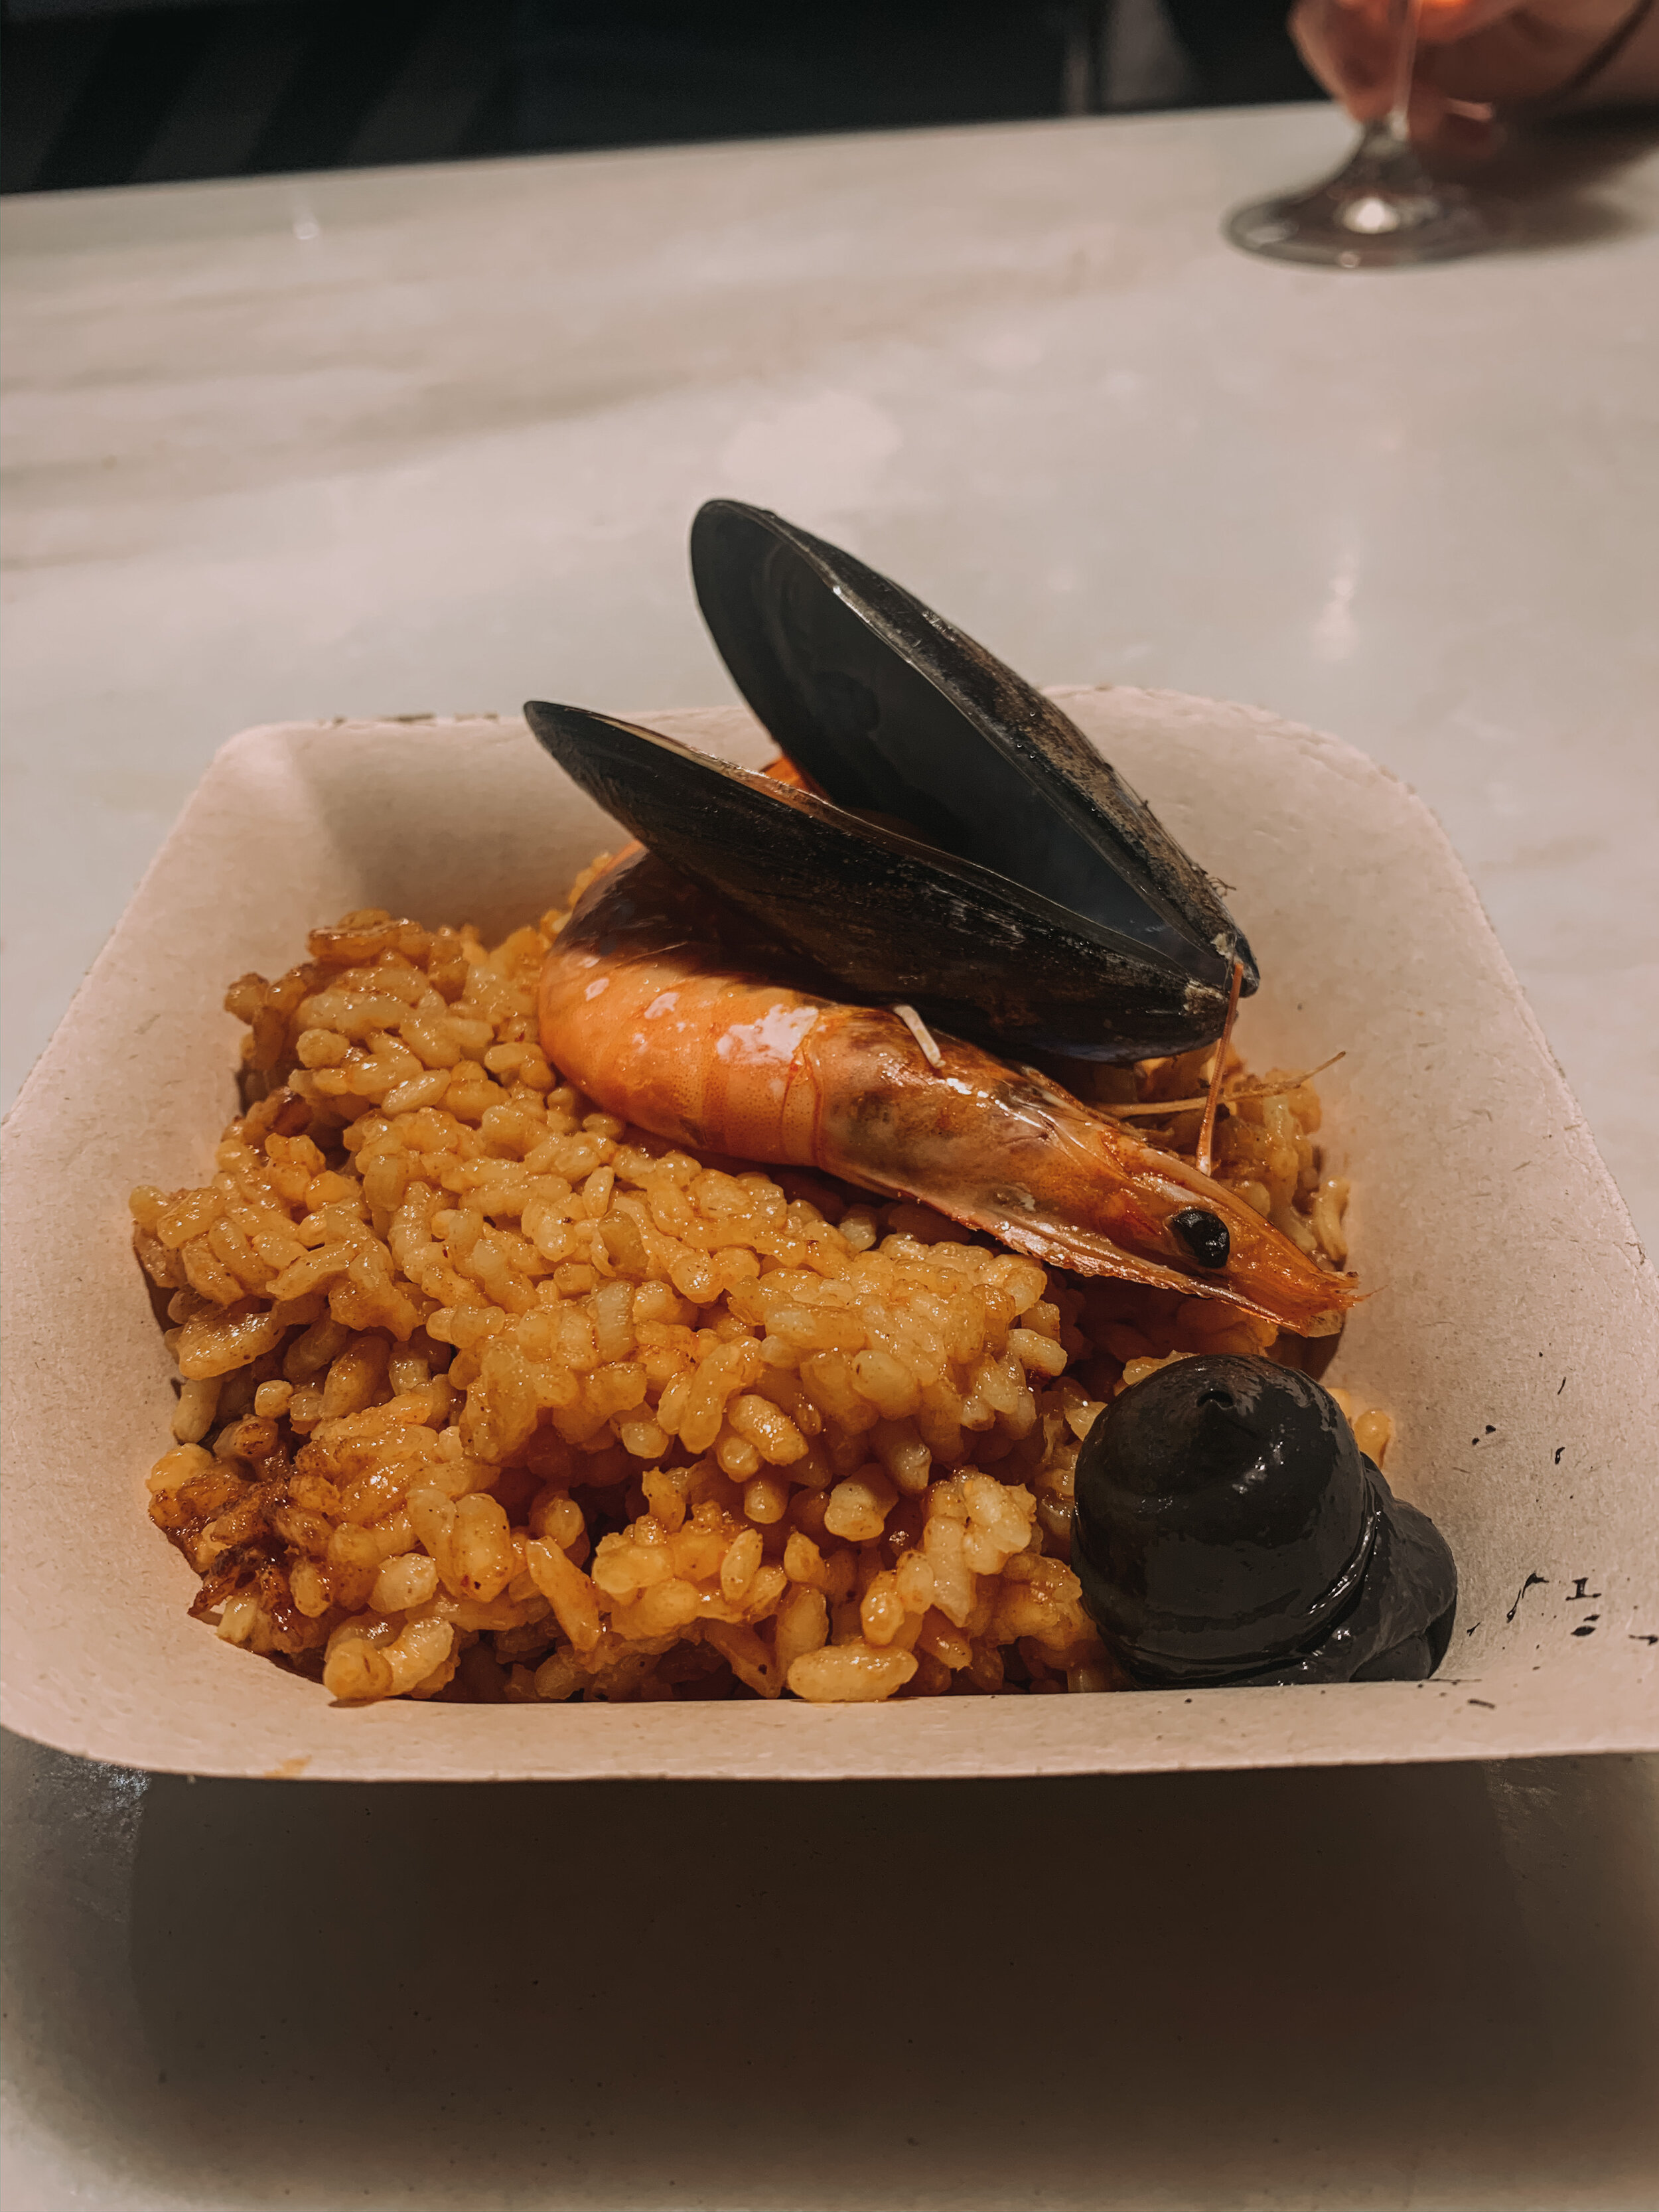  We tried our luck with paella here. Everyone says you have to try this dish when you come to Spain because it’s apparently so good. It was not .       In all fairness, the seasoned travelers in my IG DMs informed me that it’s much tastier in regions